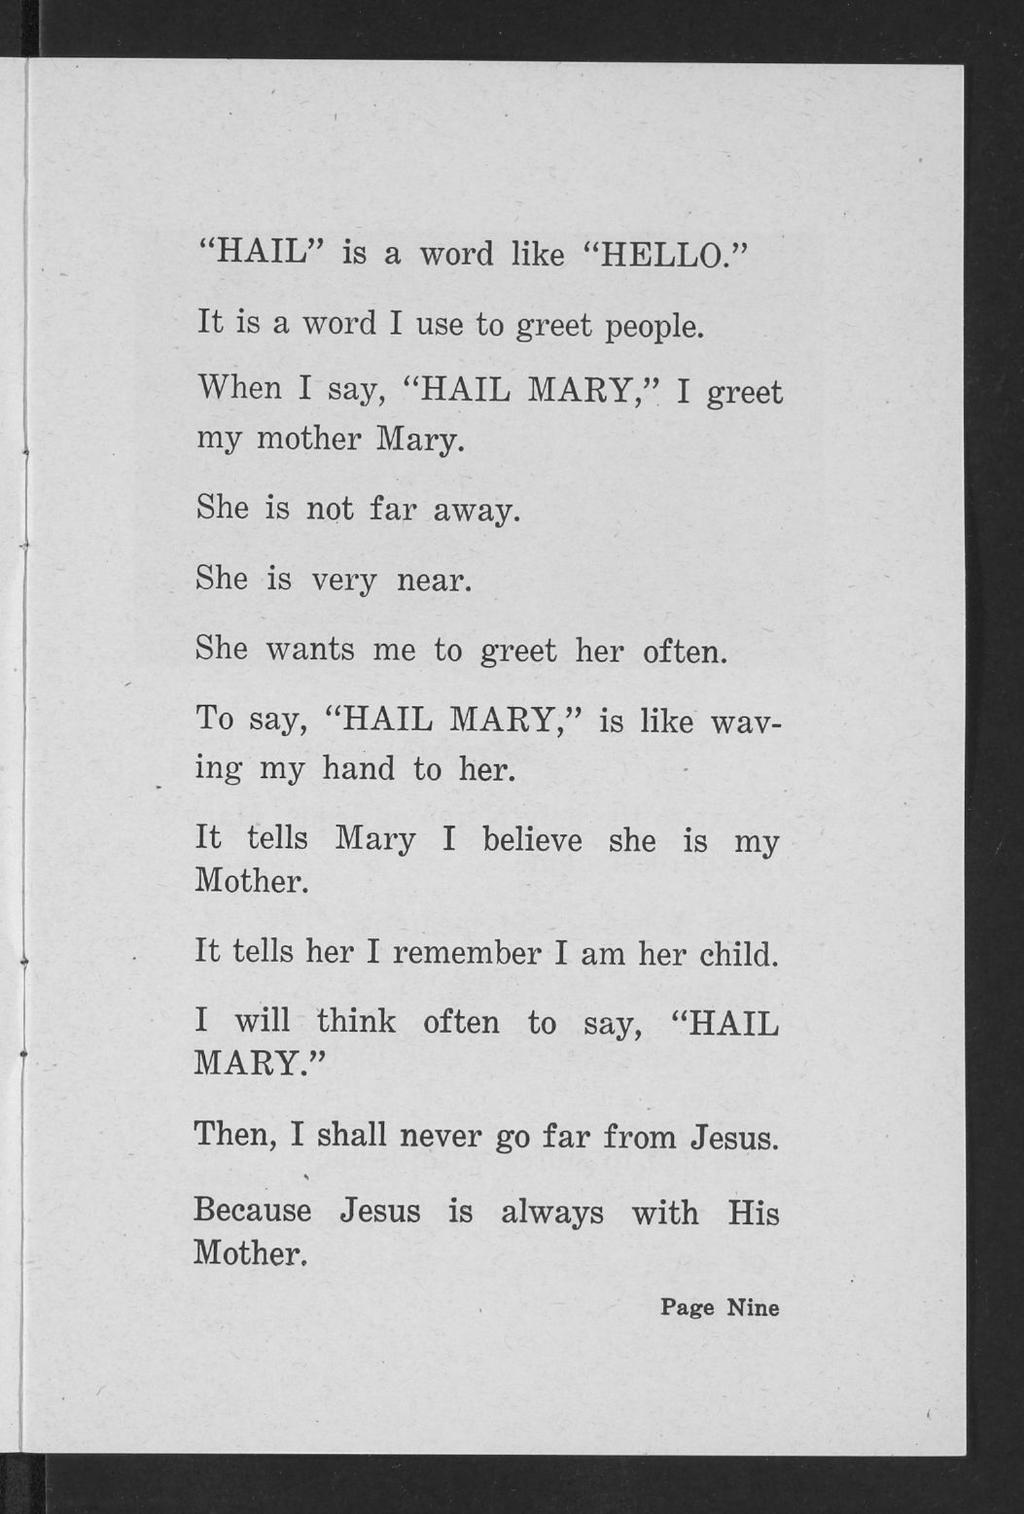 "HAIL" is a word like "HELLO." It is a word I use to greet people. When I say, "HAIL MARY," I greet my mother Mary. She is not far away. She is very near. She wants me to greet her often.